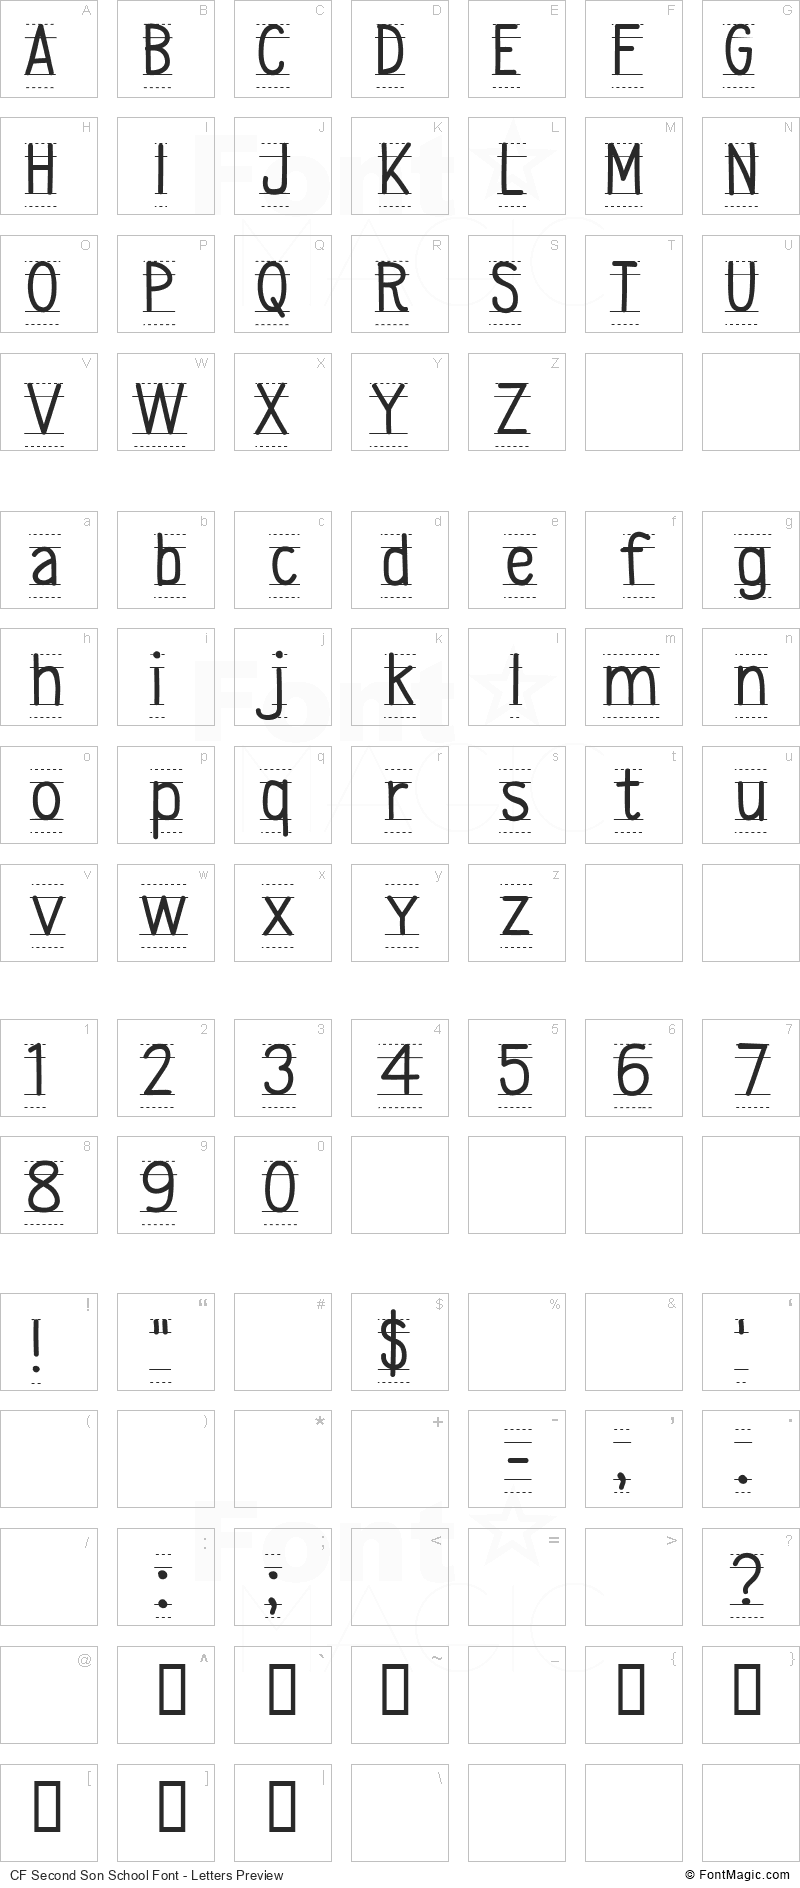 CF Second Son School Font - All Latters Preview Chart